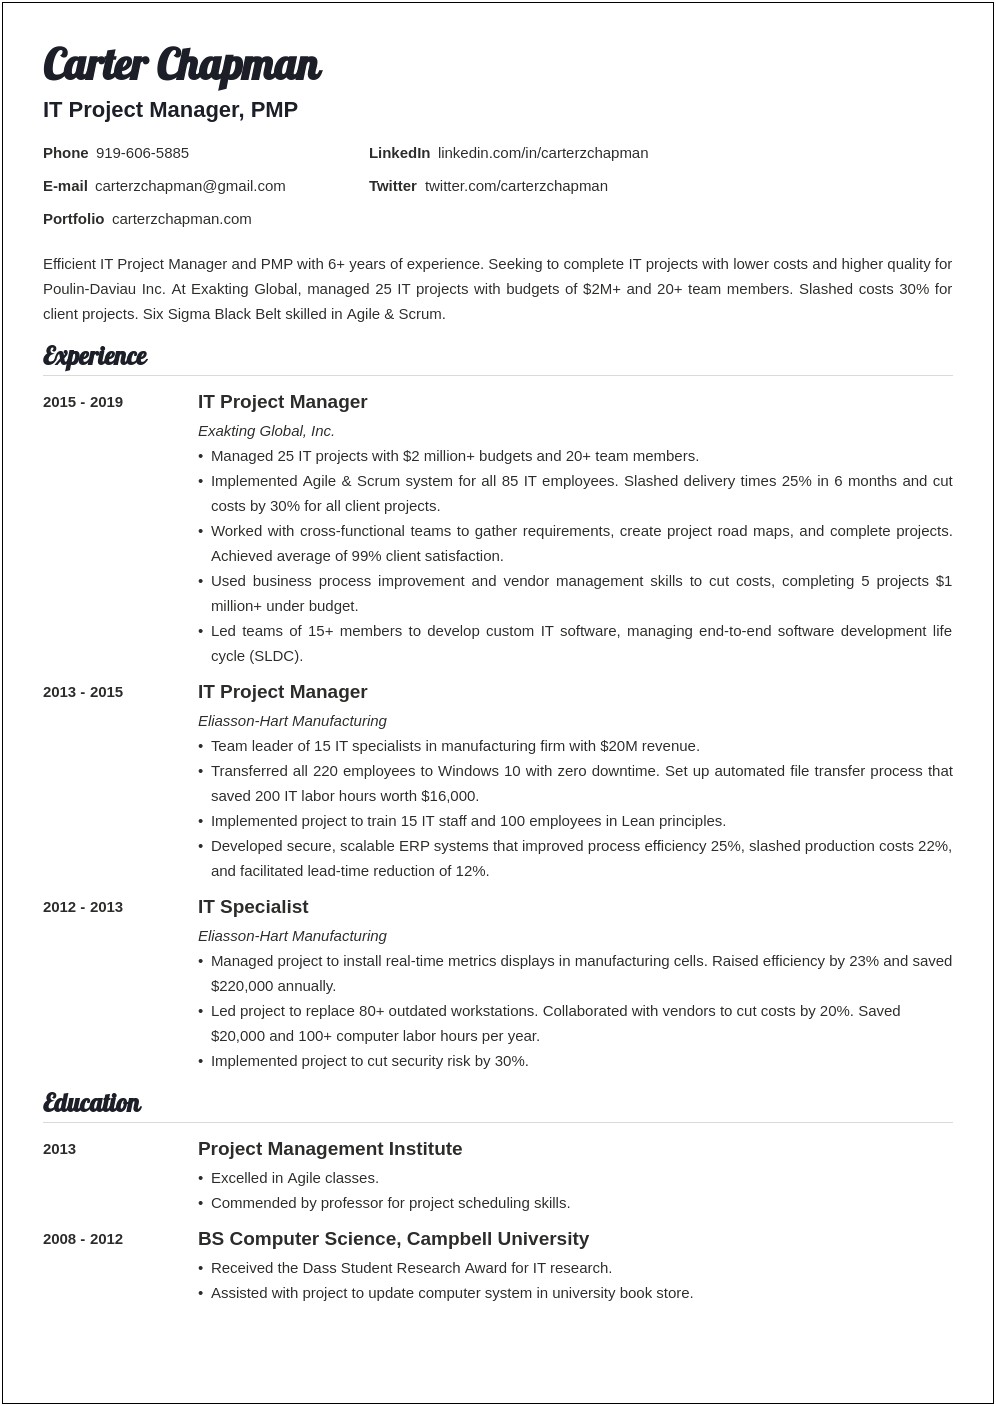 View Resumes It Project Managers